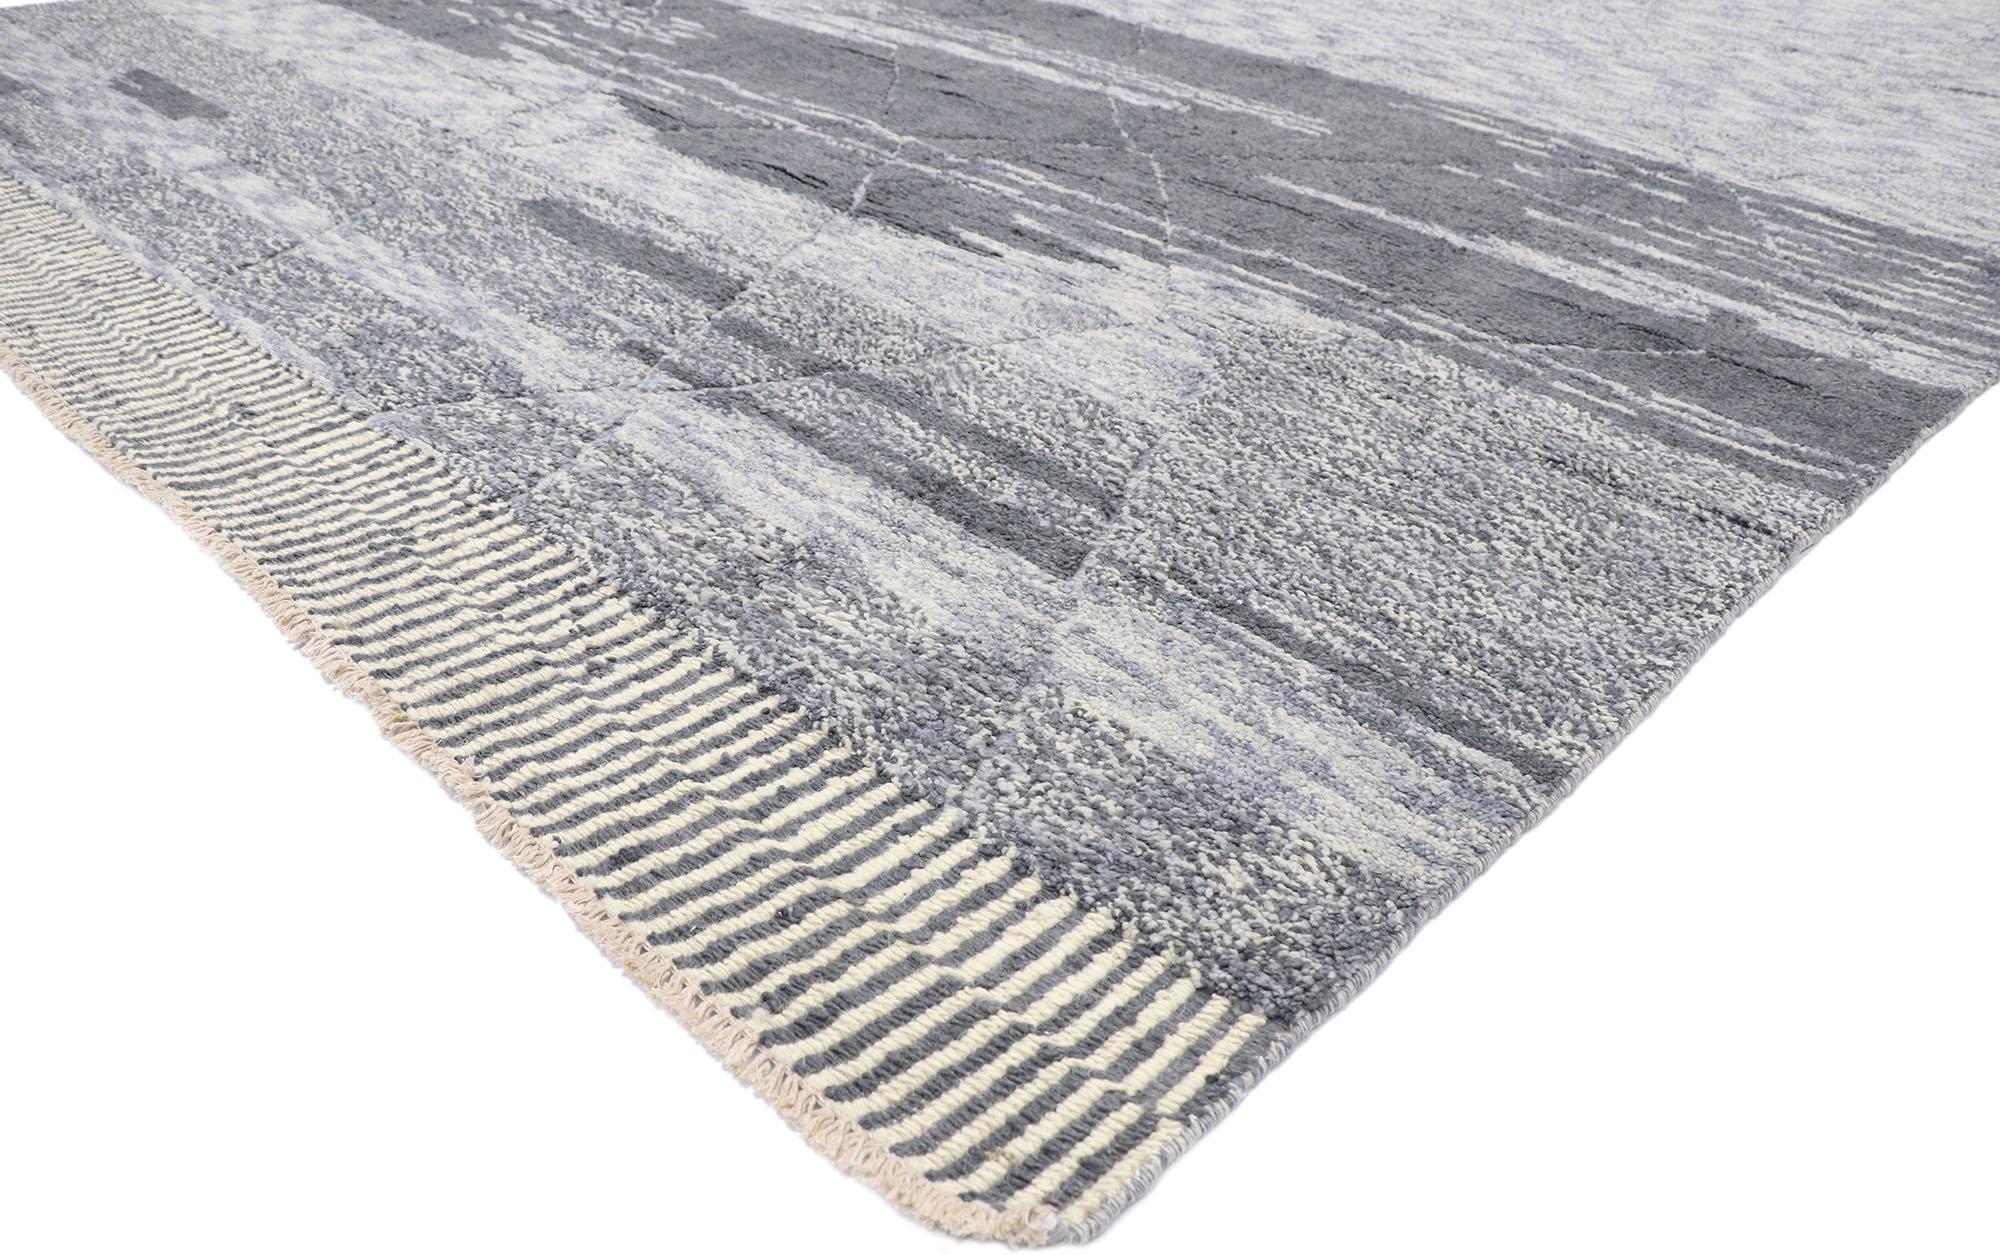 80659, new contemporary Gray Moroccan style rug with Modern Bauhaus style. Effortless beauty and simplicity meet modern Bauhaus style in this hand knotted wool contemporary gray Moroccan style rug. Showcasing an expressive yet subtle design,